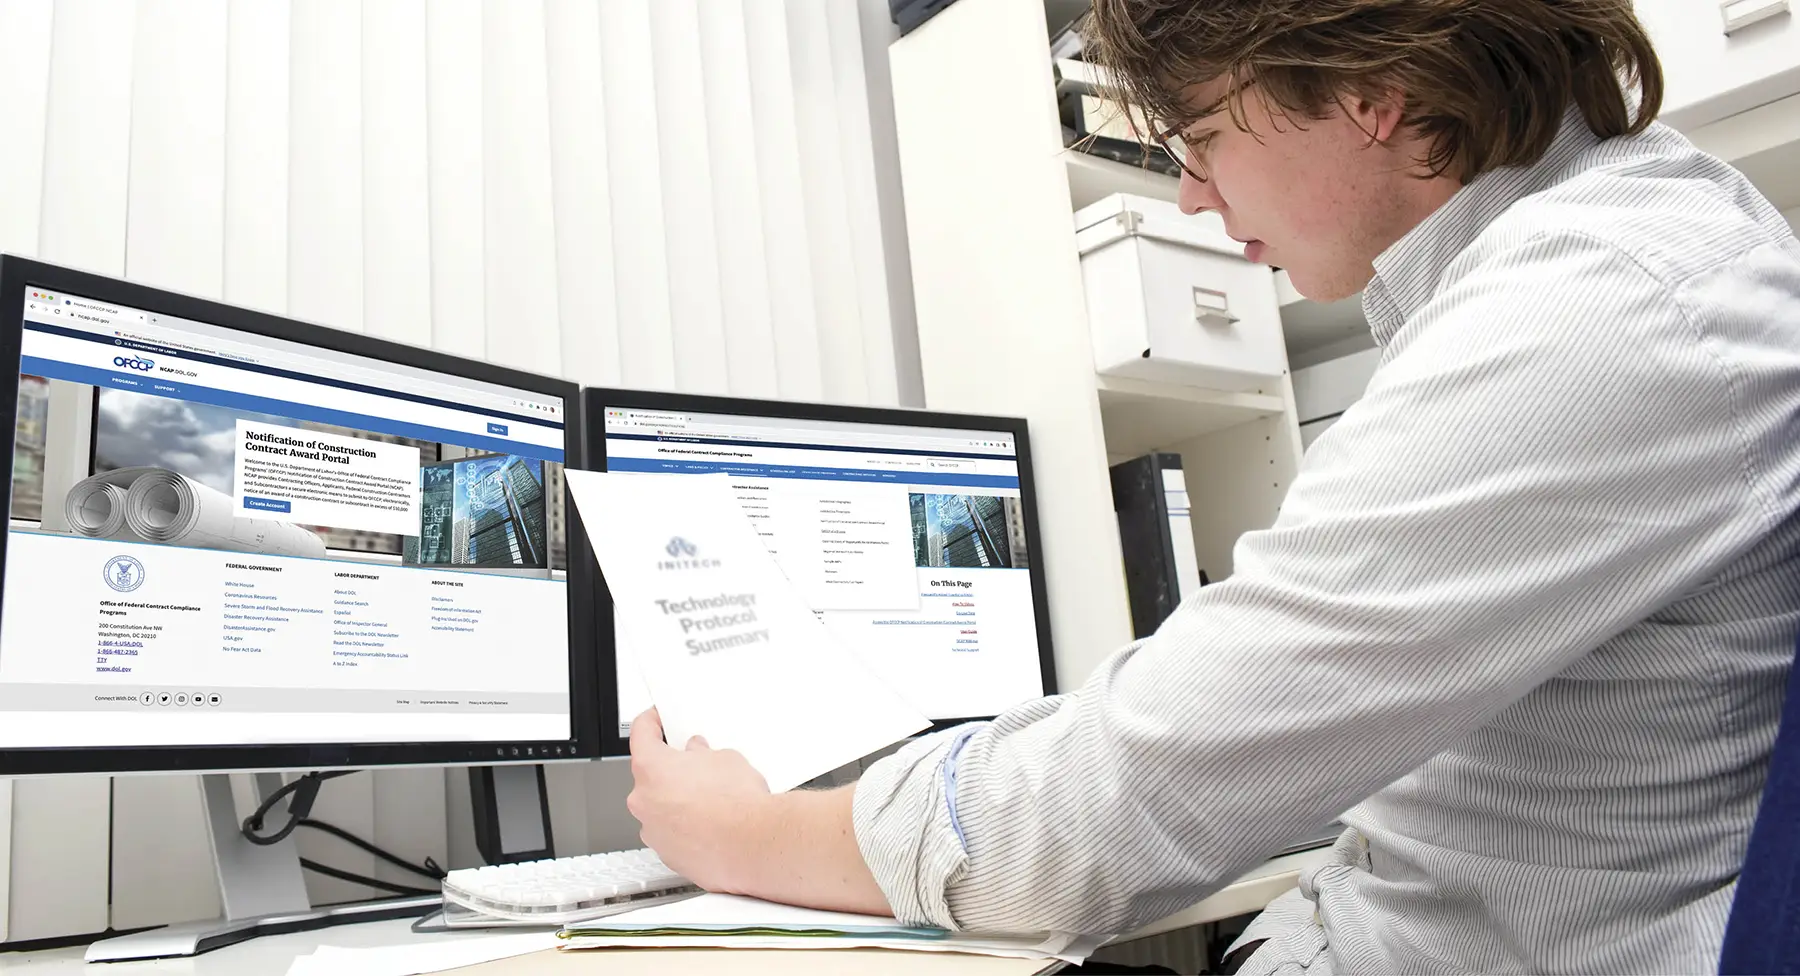 Man looking at computer screen with OFCCP portal website